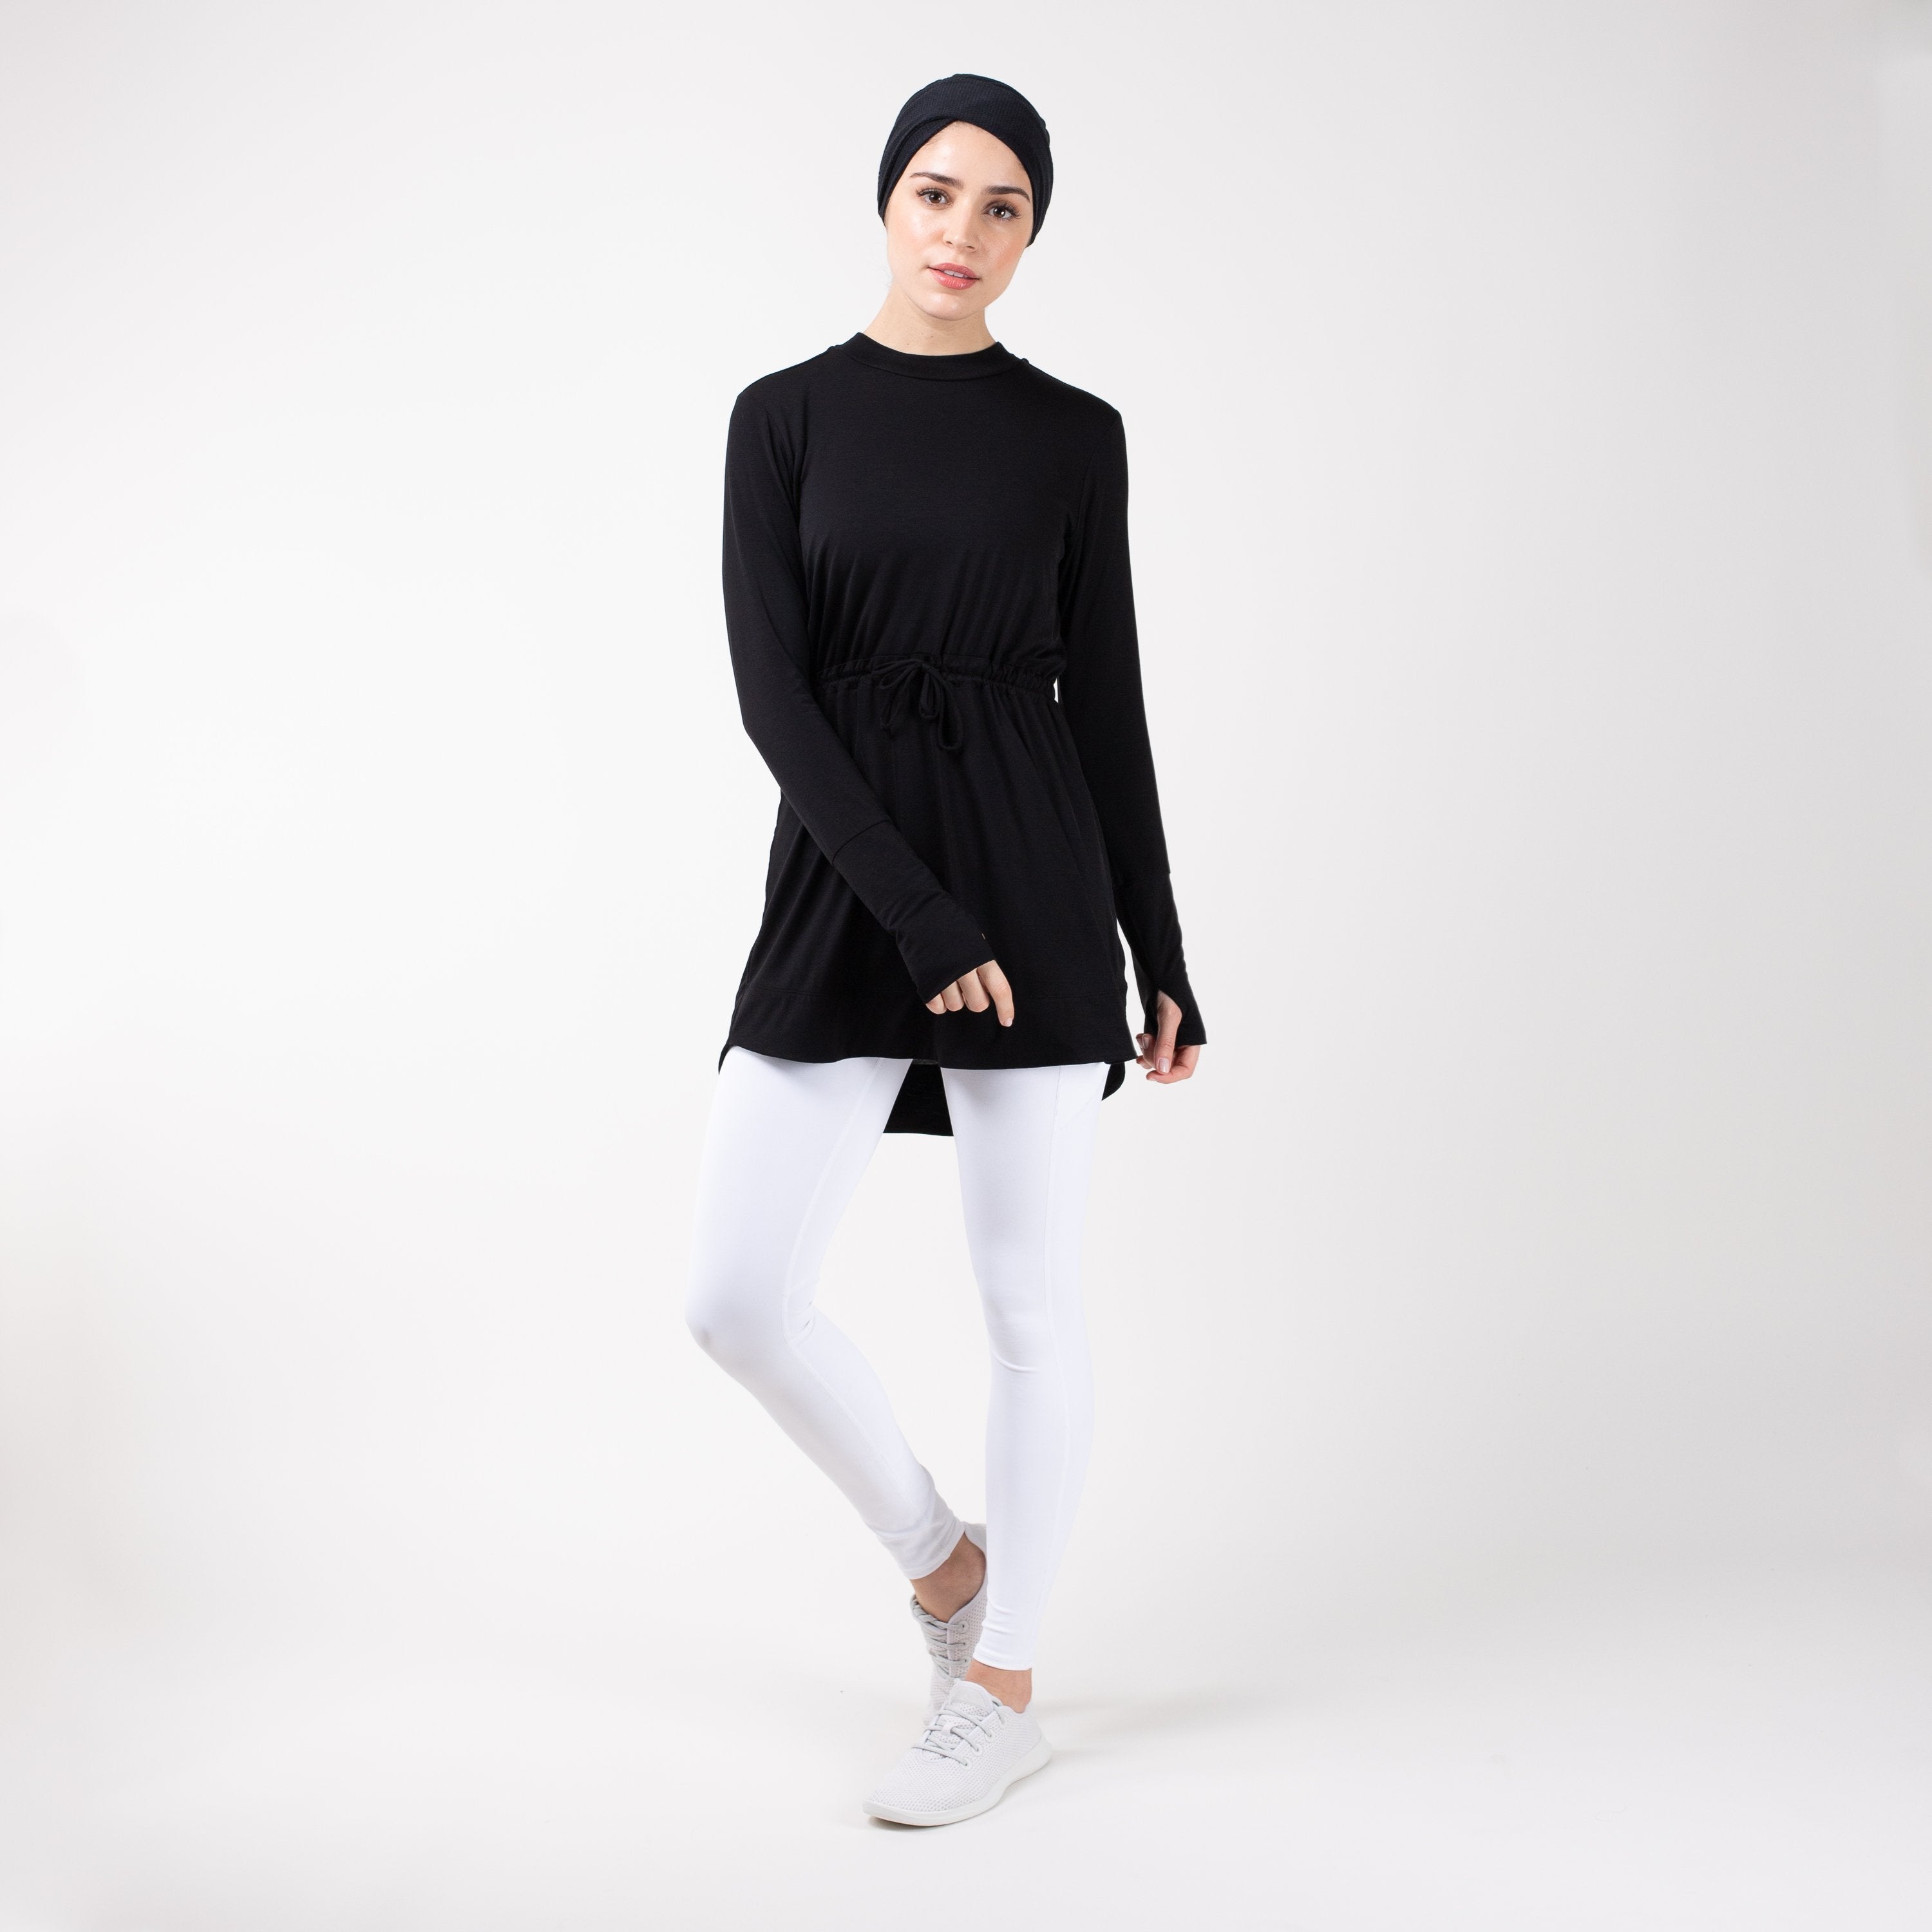 Woman in modest, black HAWA drawstring tee shirt and white leggings in front of a white backdrop.